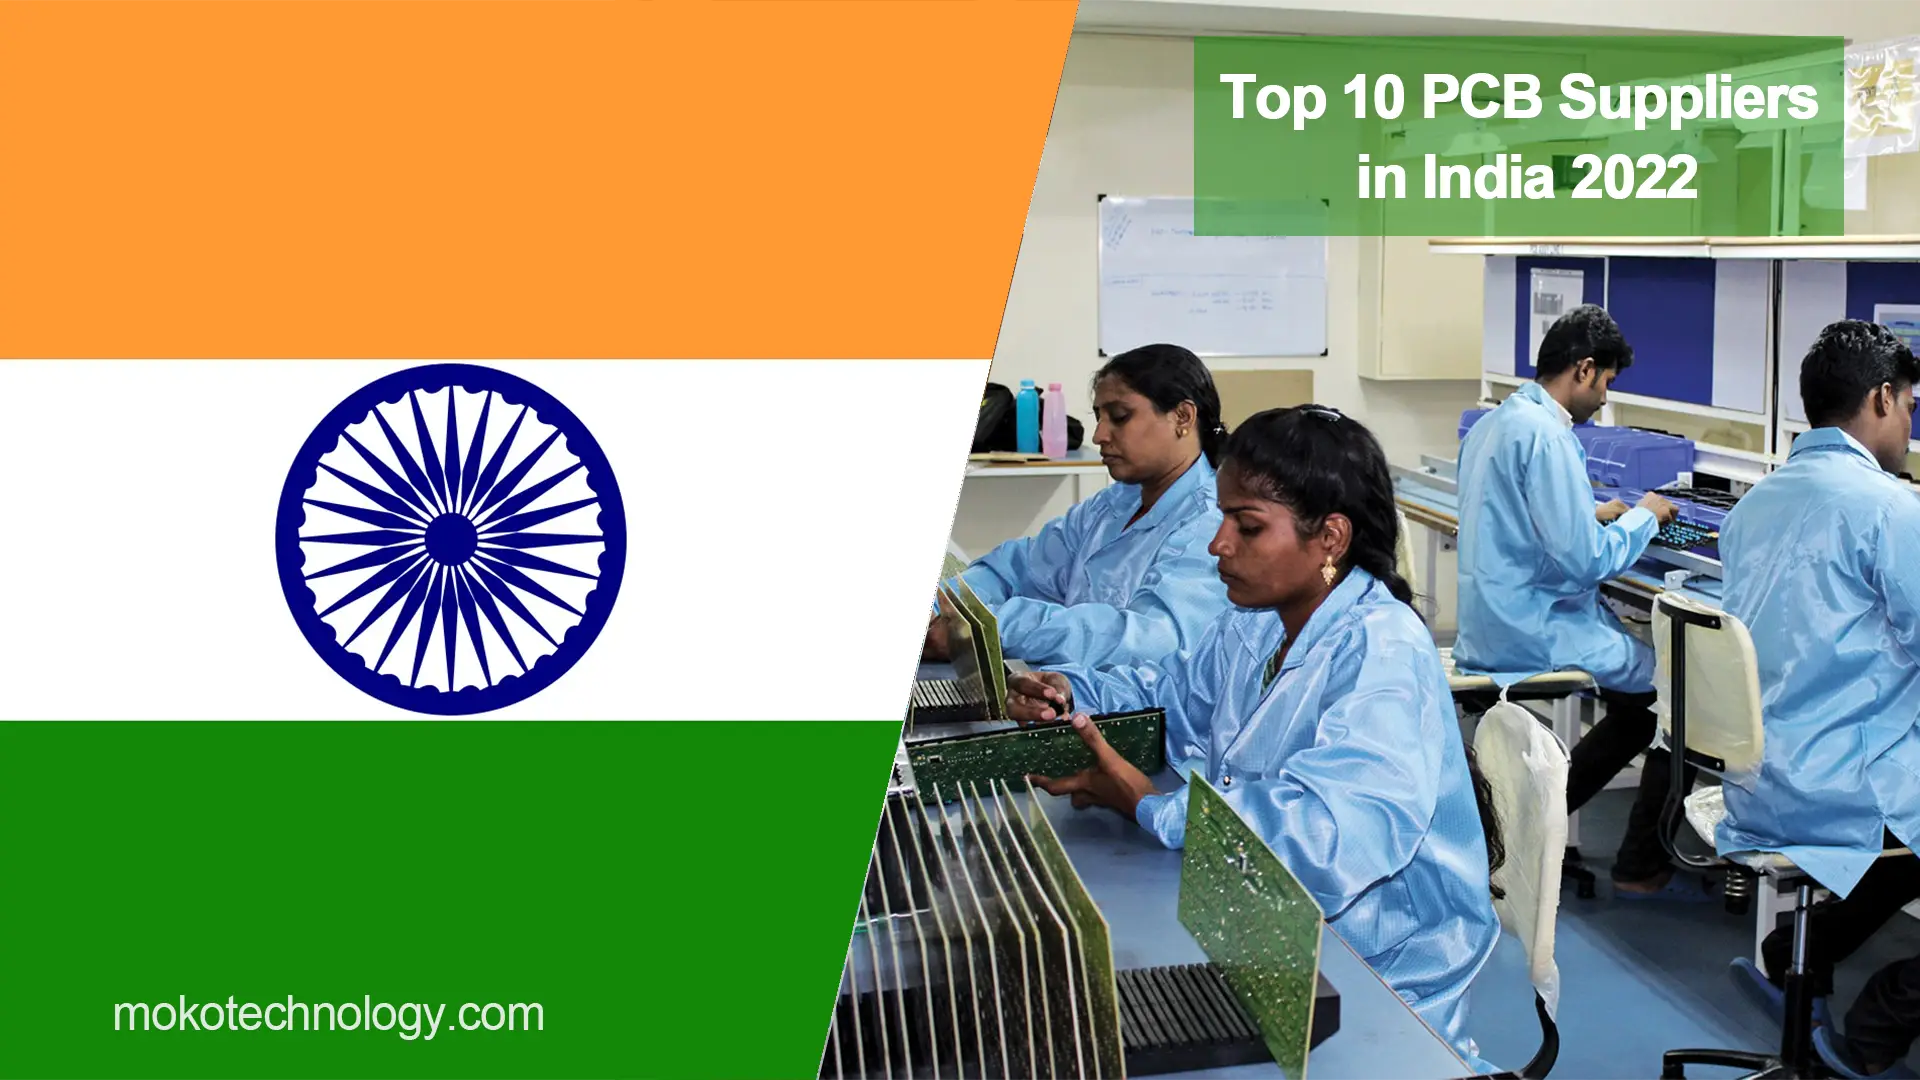 Top 10 PCB Suppliers in India 2022